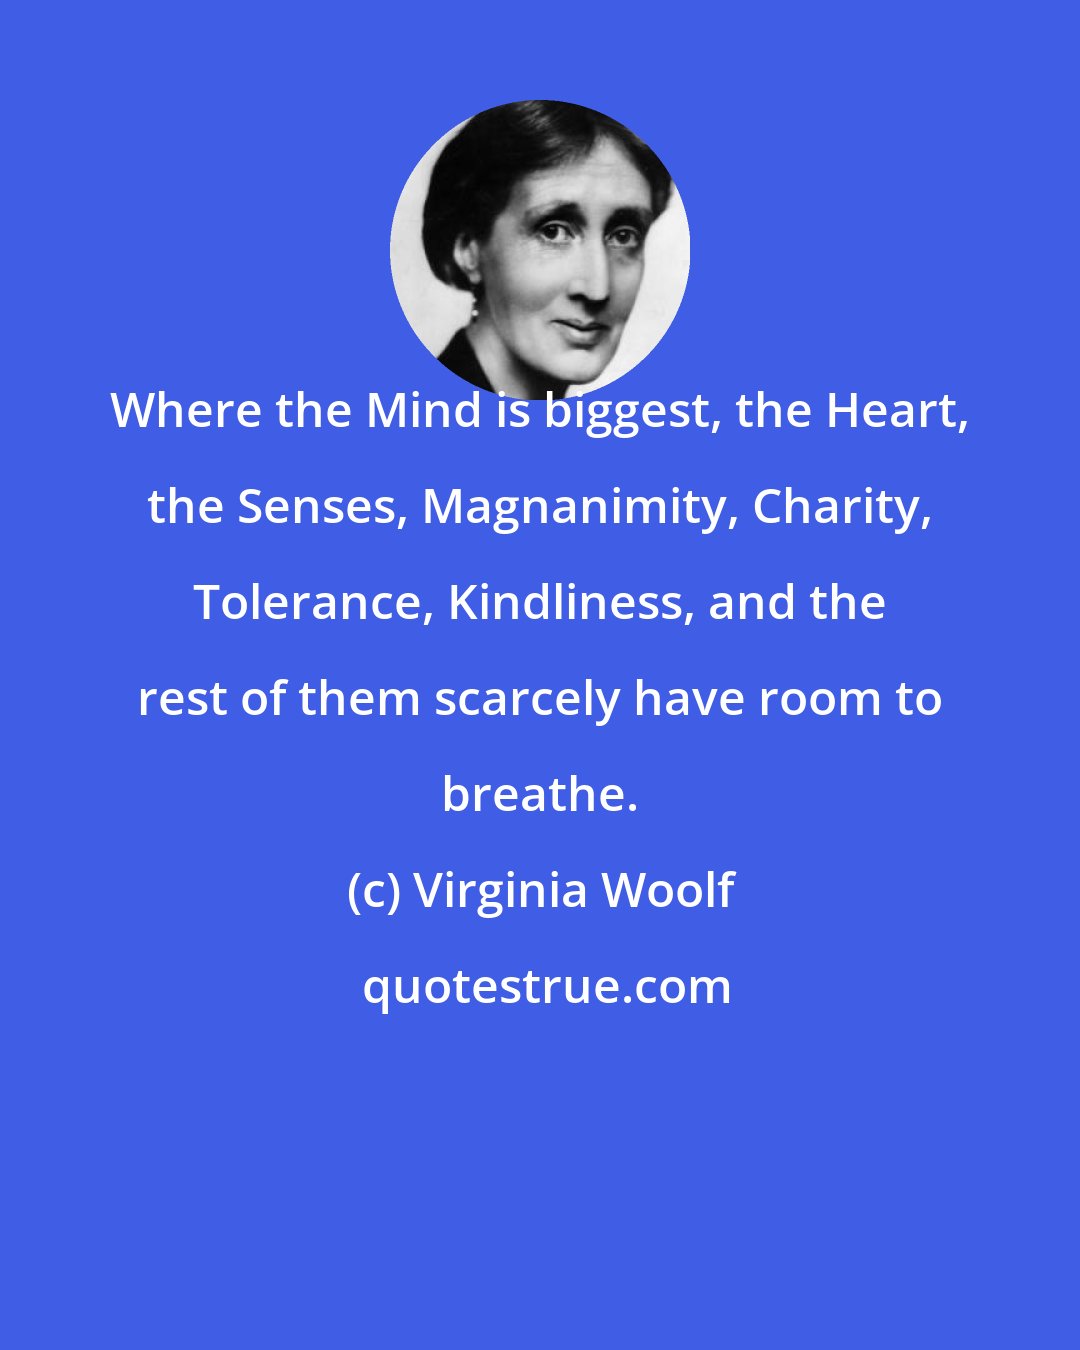 Virginia Woolf: Where the Mind is biggest, the Heart, the Senses, Magnanimity, Charity, Tolerance, Kindliness, and the rest of them scarcely have room to breathe.